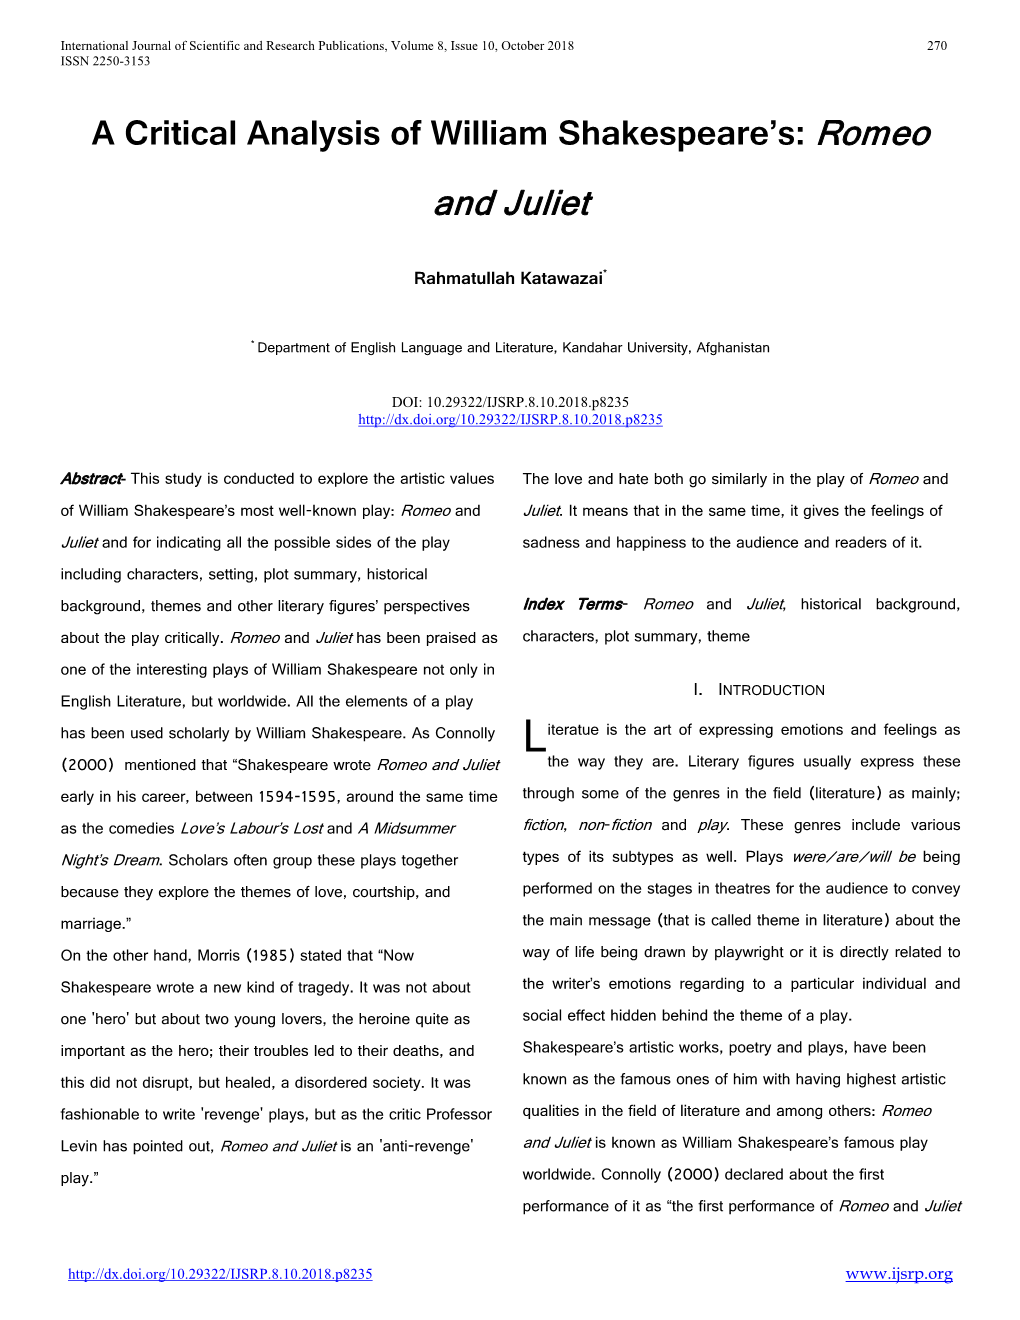 A Critical Analysis of William Shakespeare's: Romeo and Juliet